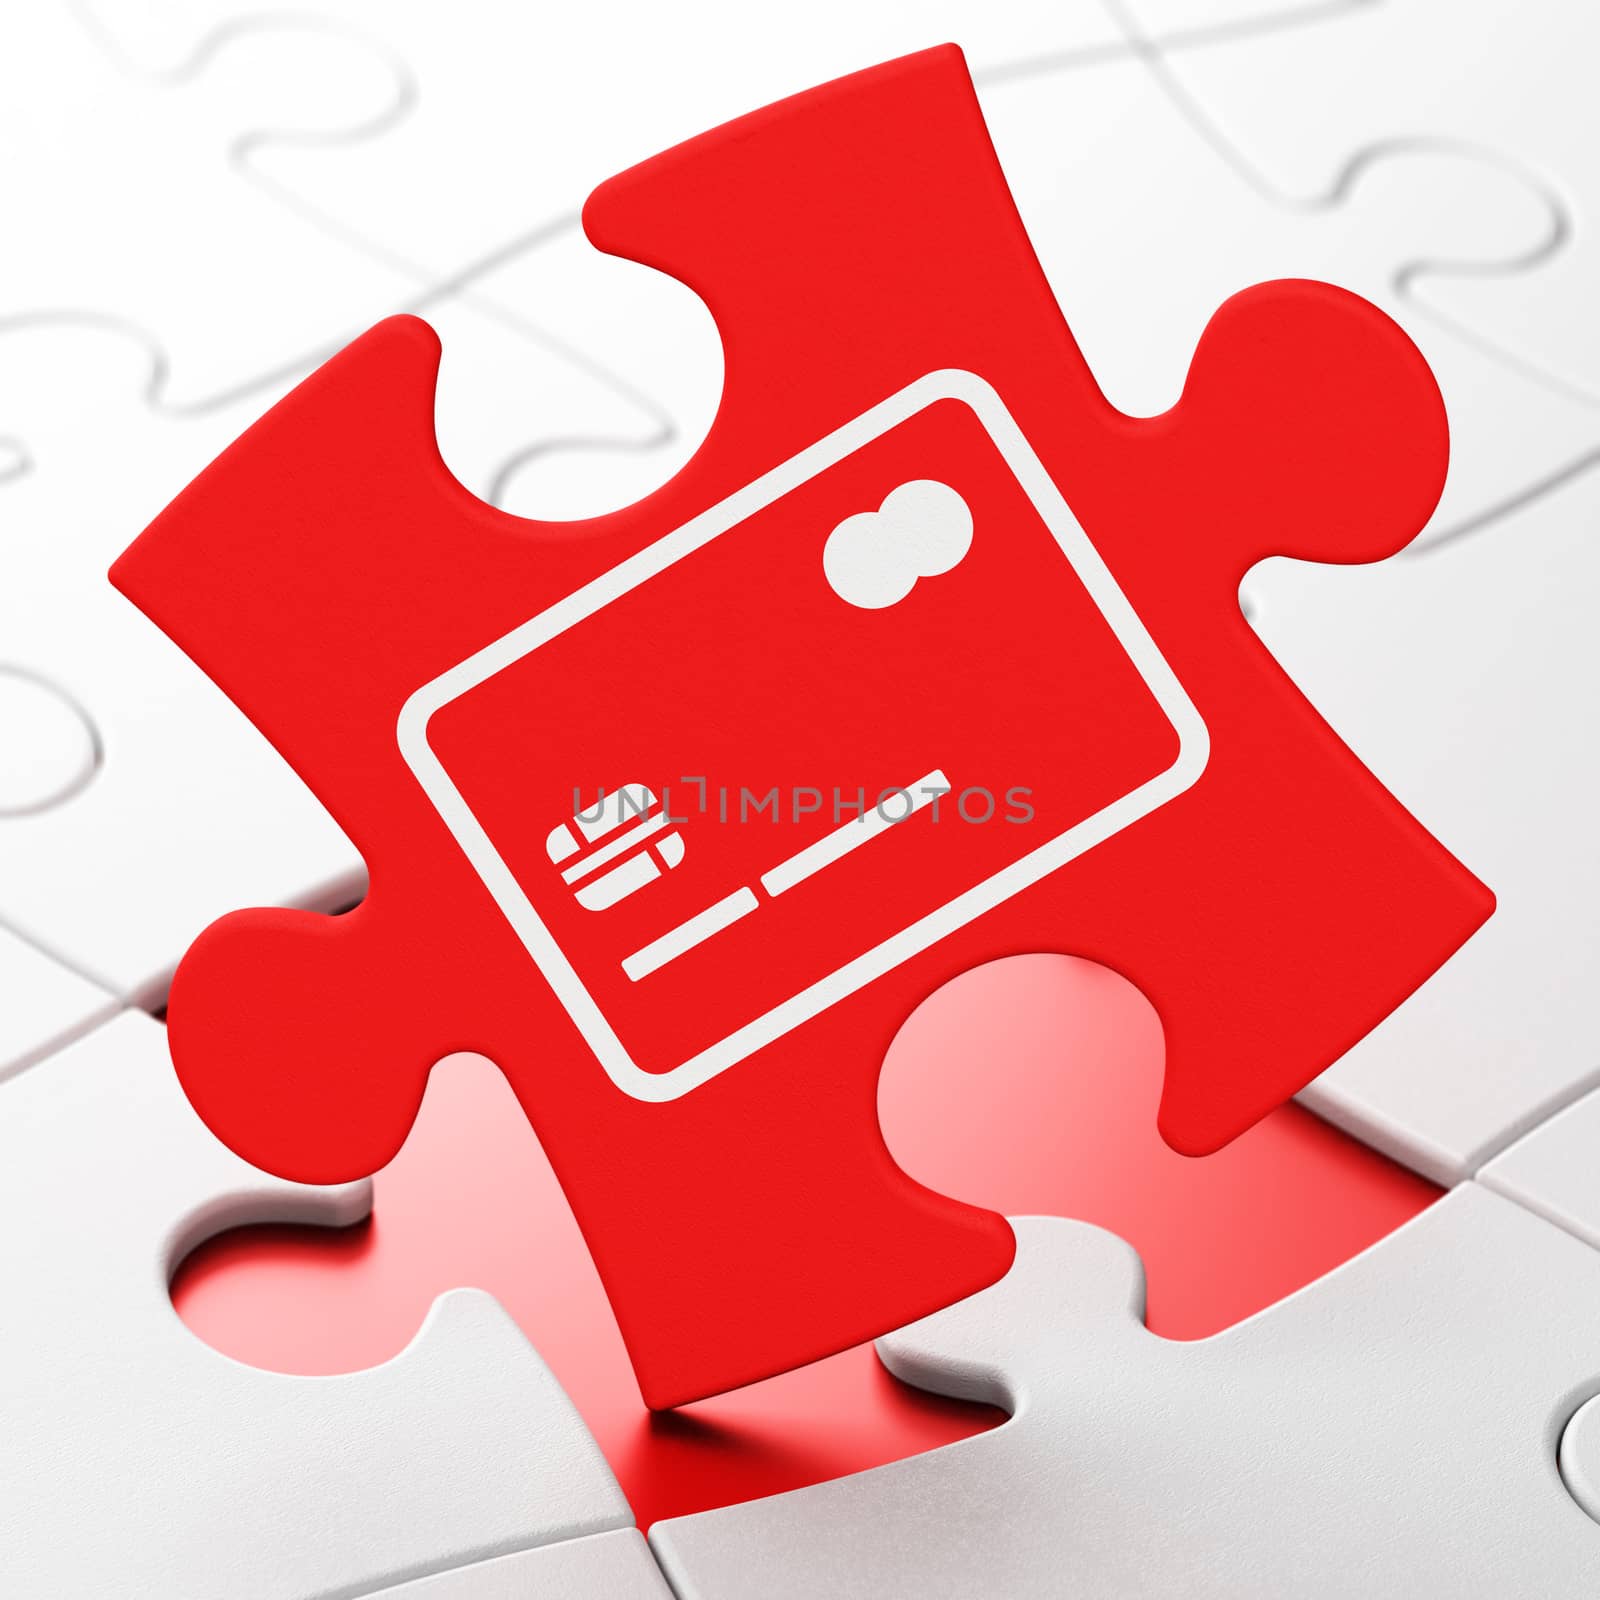 Currency concept: Credit Card on Red puzzle pieces background, 3D rendering